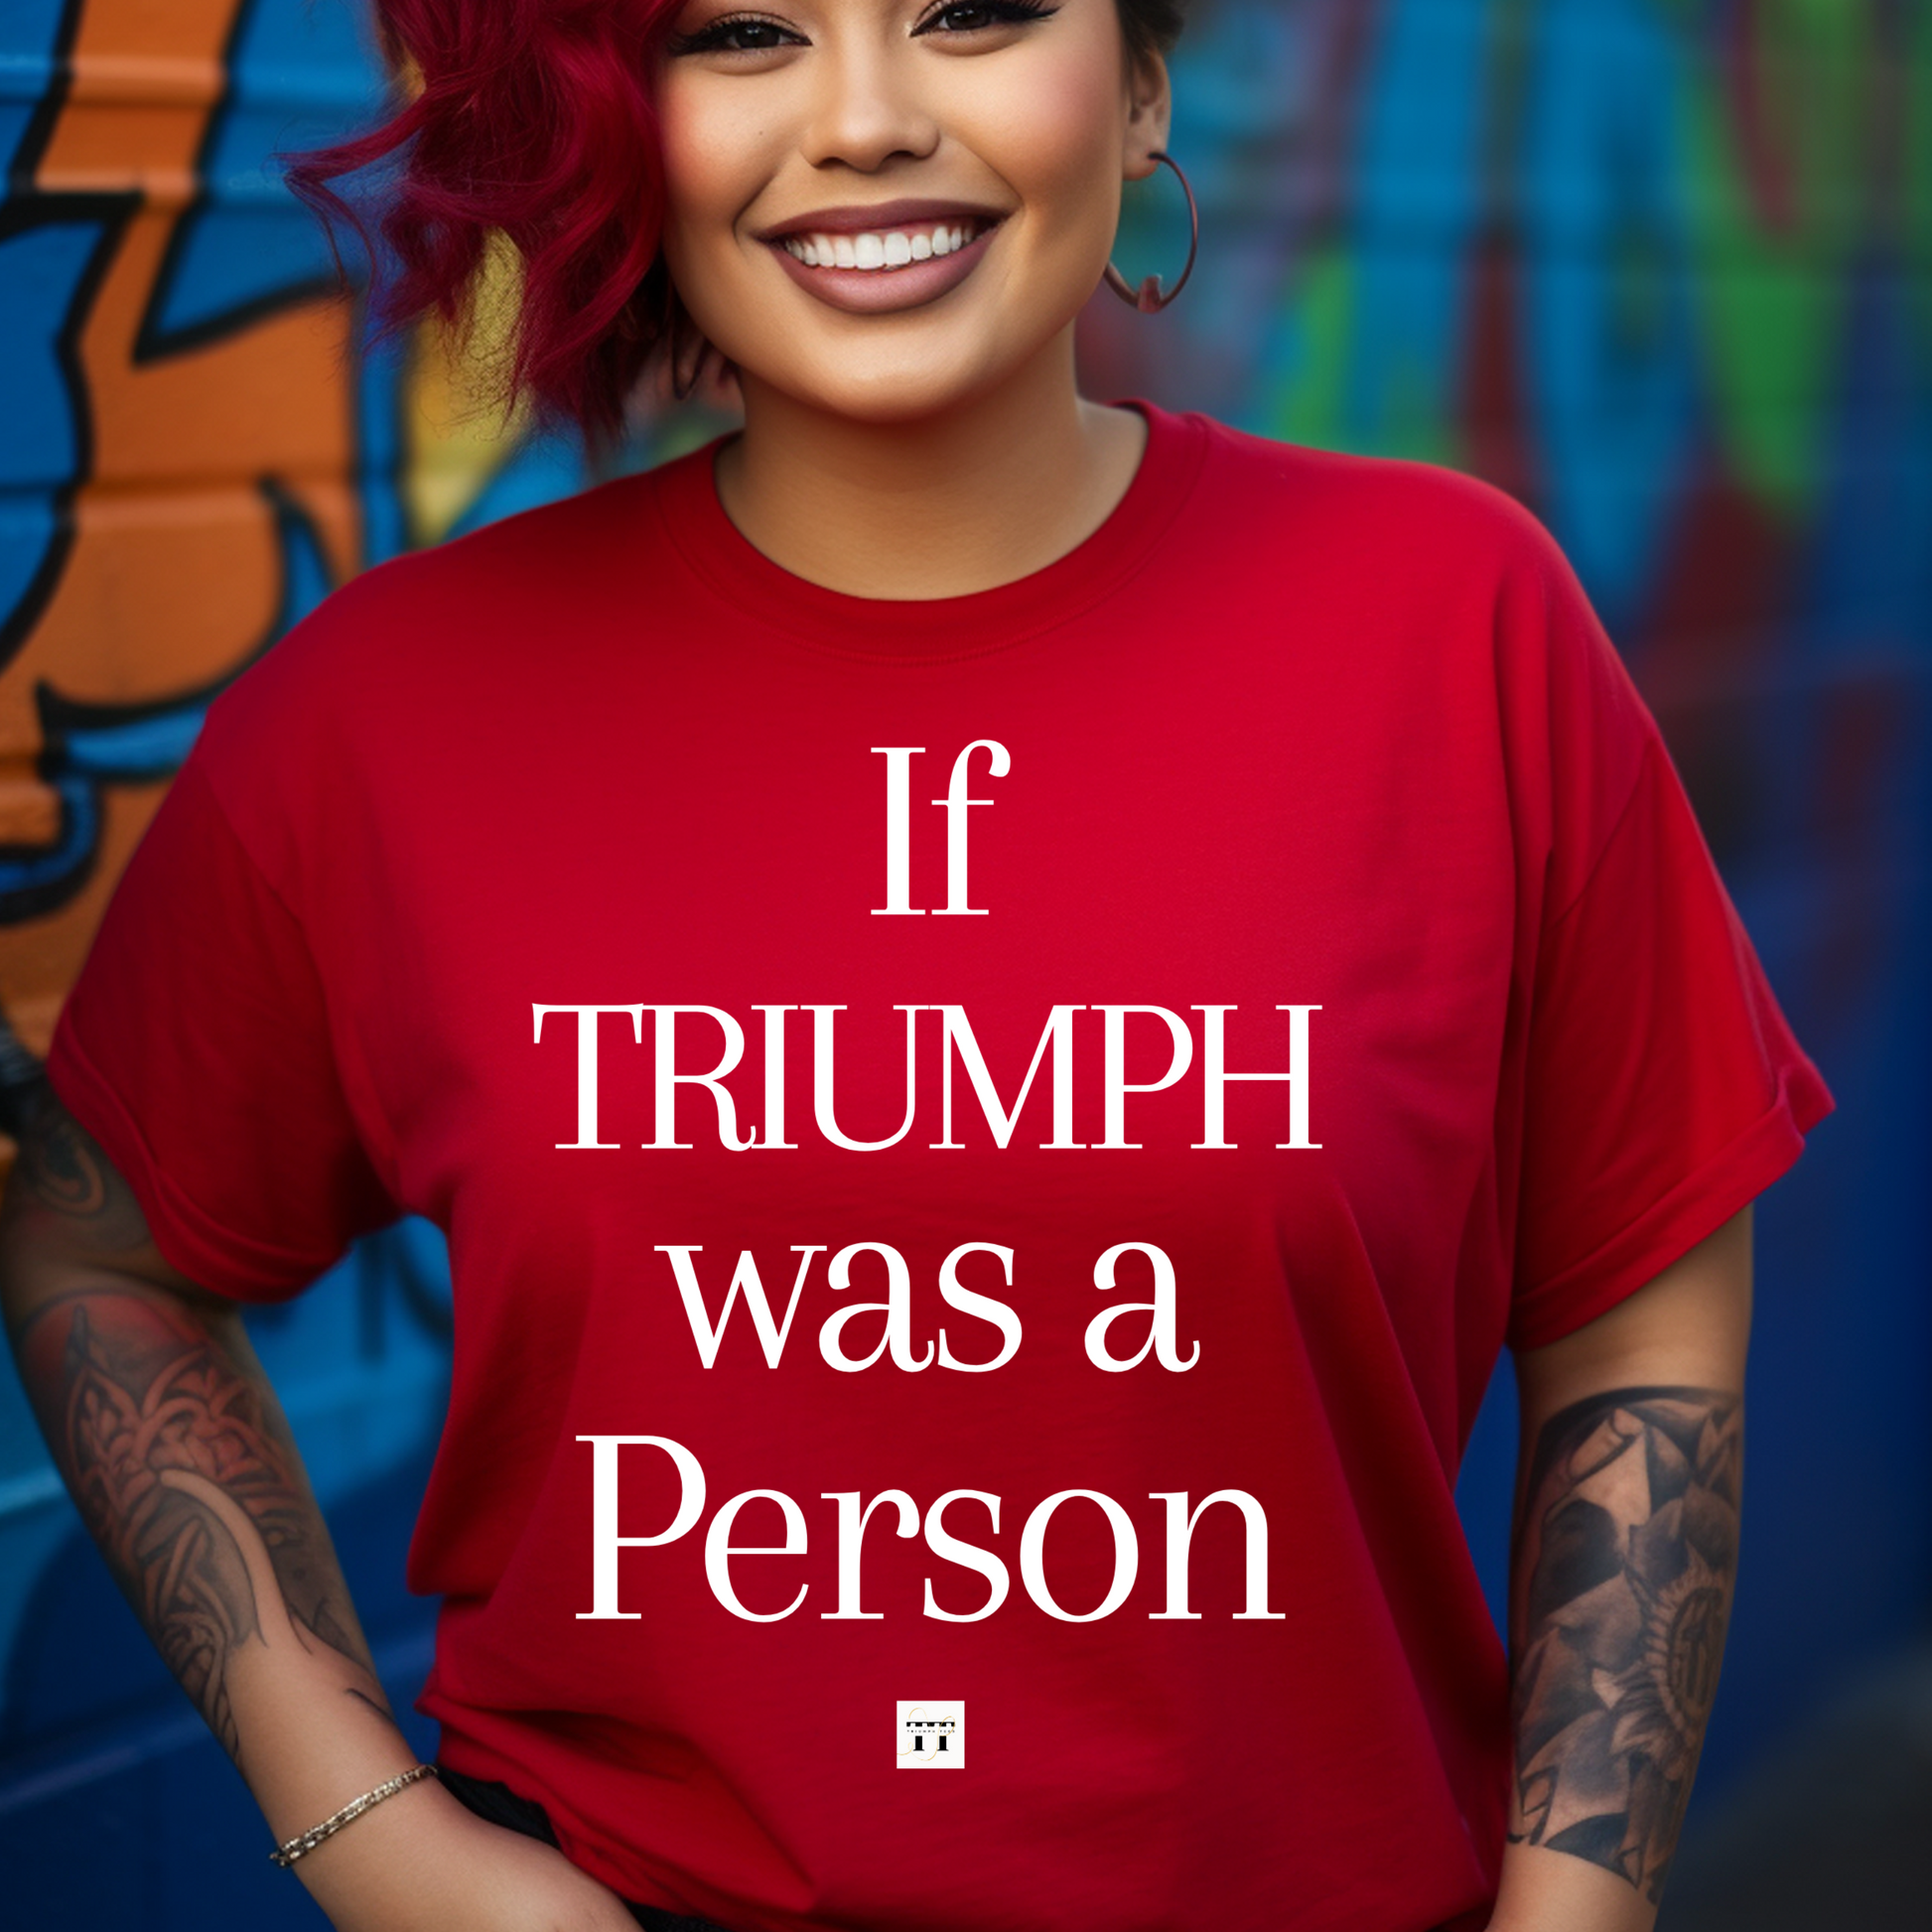 Red 'If Triumph was a Person' t-shirt by Triumph Tees, an exceptional choice in faith apparel. Express your spirituality through this unique Christian clothing design.